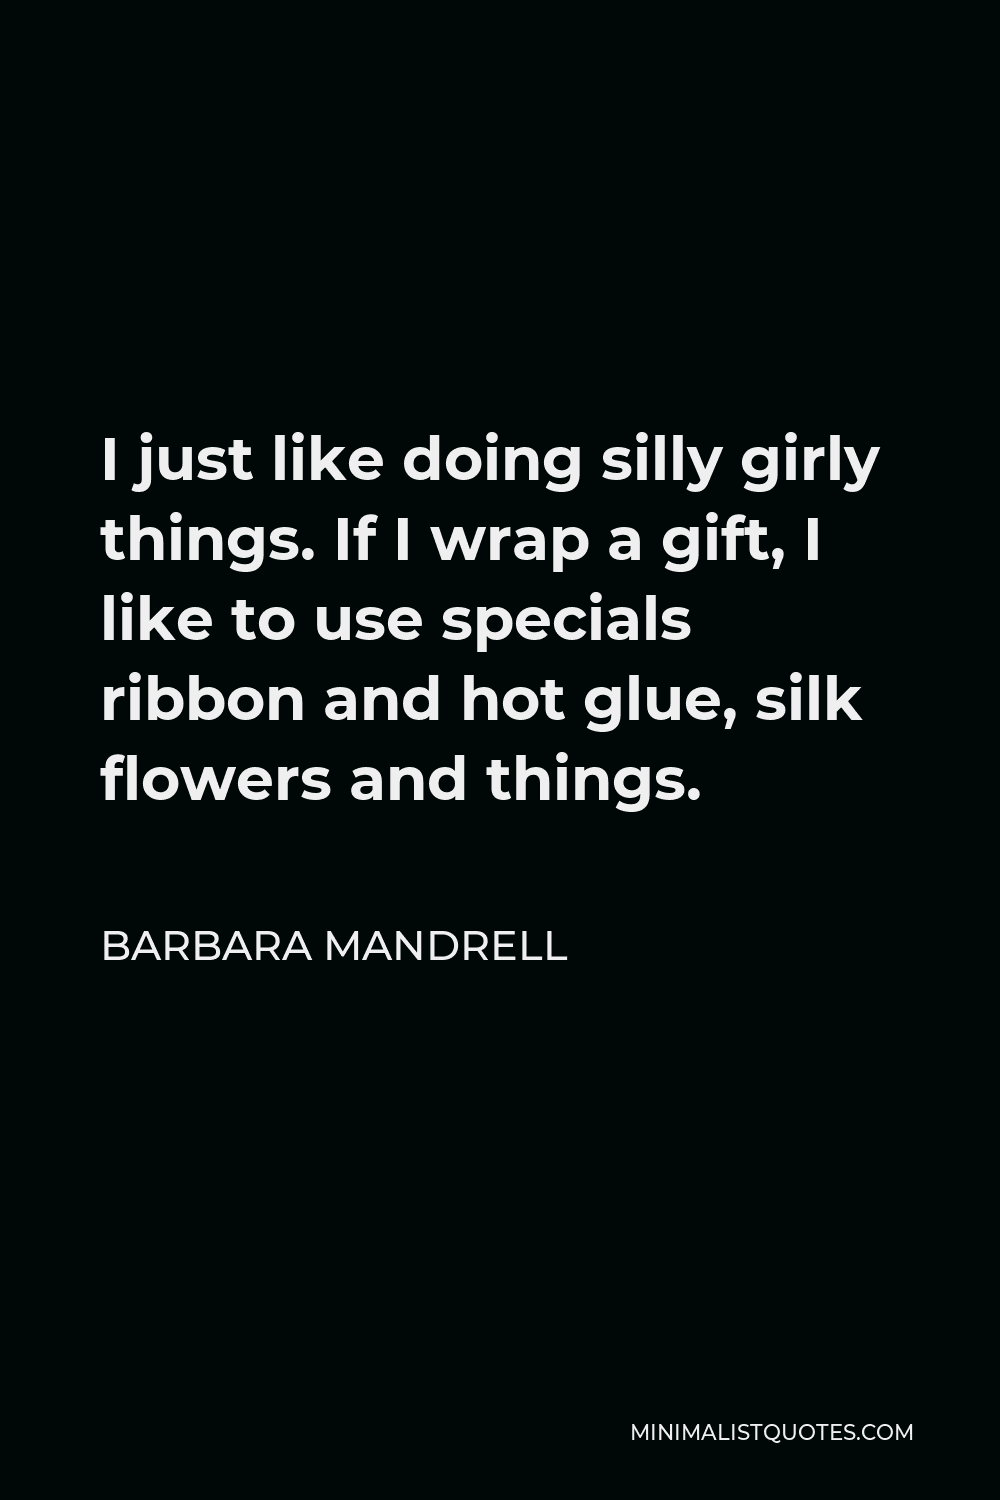 Barbara Mandrell Quote - I just like doing silly girly things. If I wrap a gift, I like to use specials ribbon and hot glue, silk flowers and things.